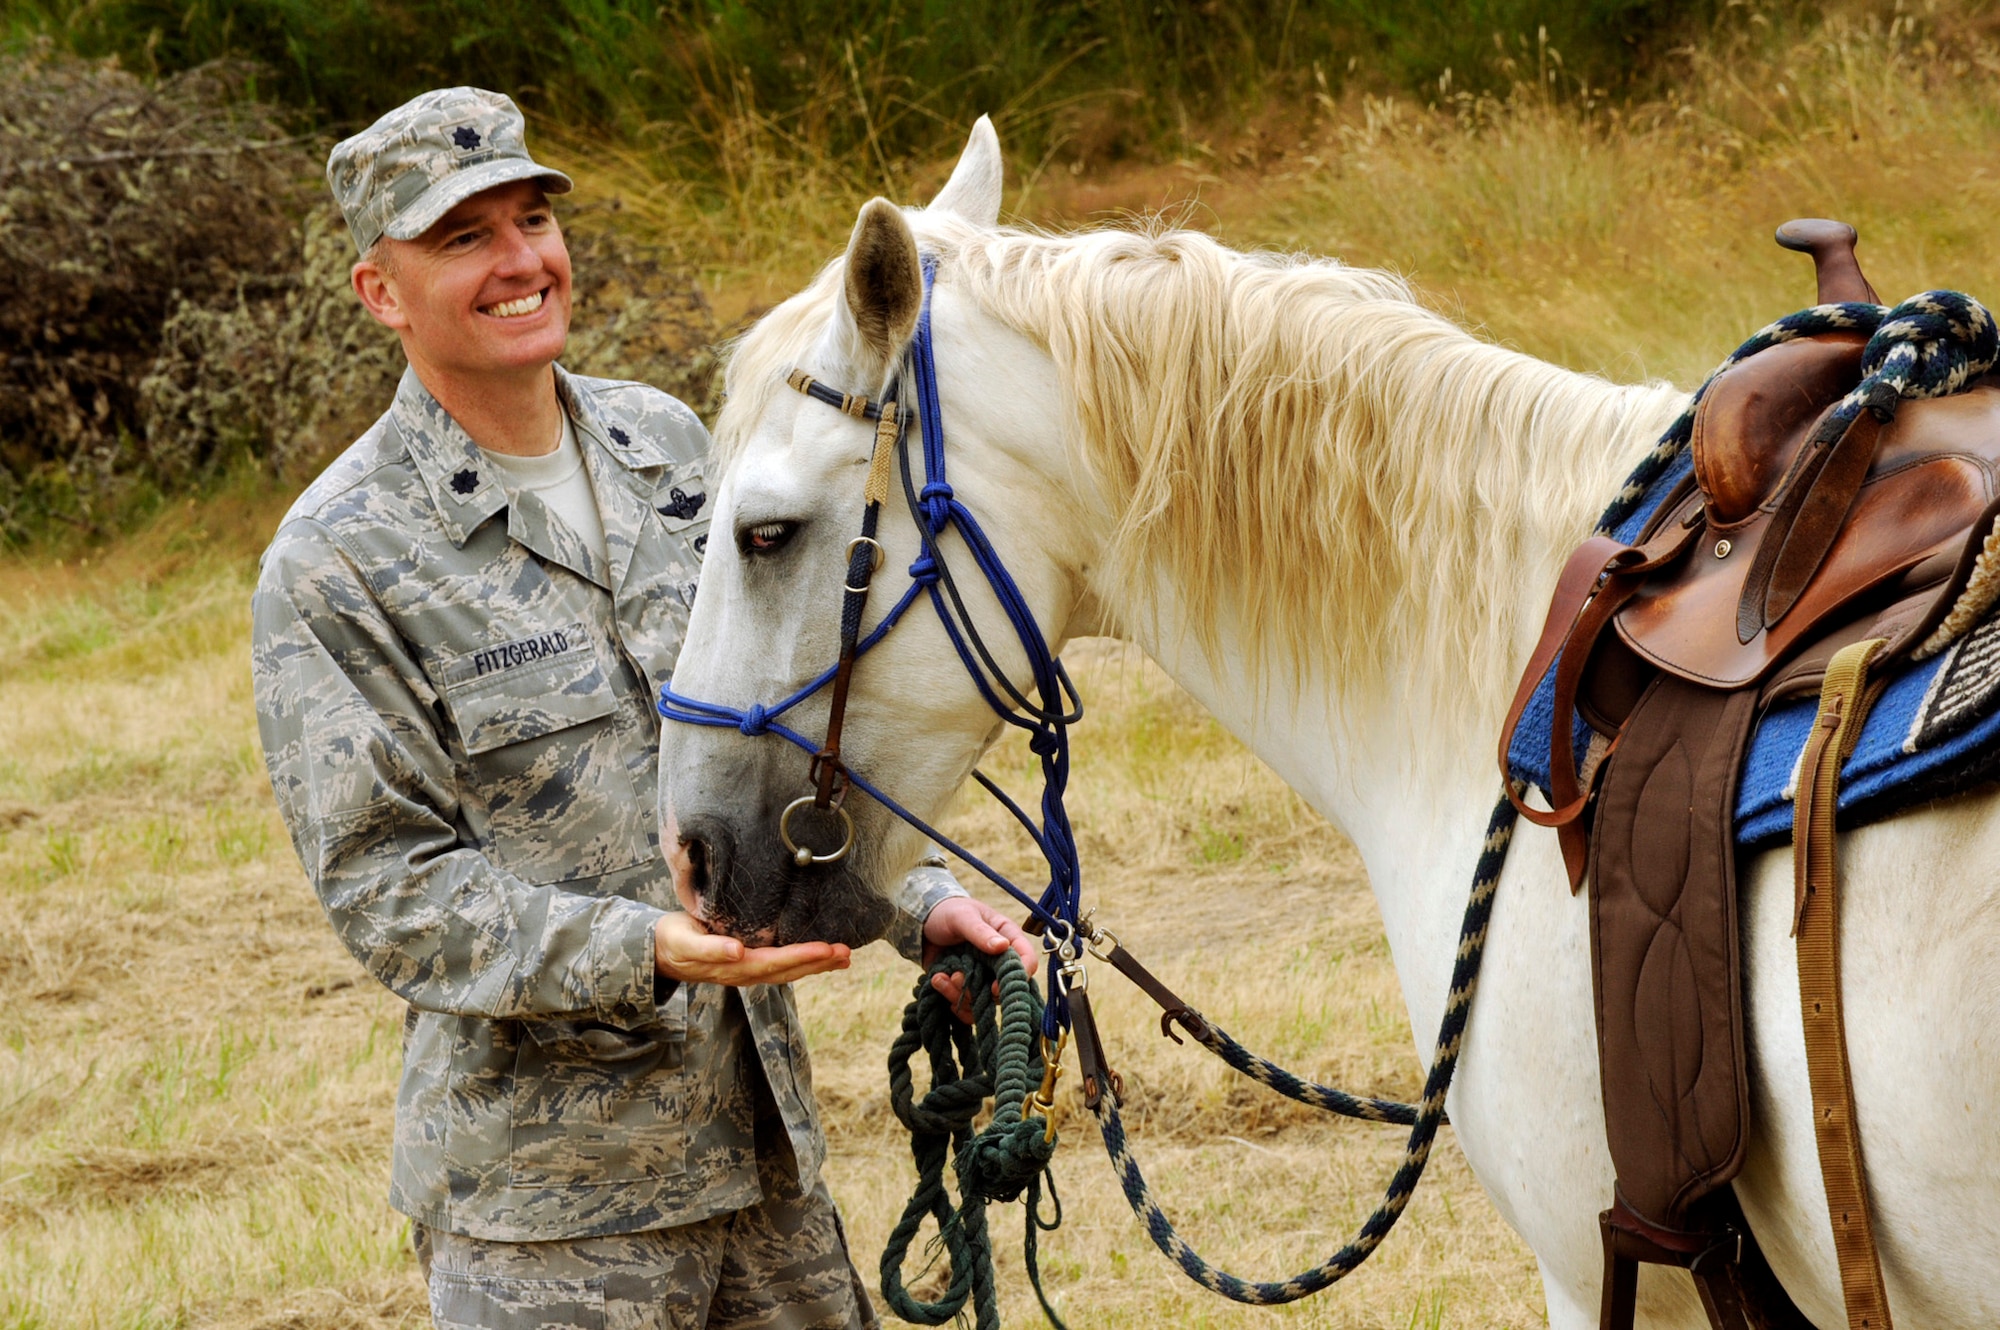 Oregon Air National Guard Lt. Col. Paul Fitzgerald gives a quick snack to Smokey, one of the horses at Camp Rosenbaum as part of the V.I.G. Day (Very Important Guest) tour of events on July 27, 2011. Camp Rosenbaum is a youth citizenship camp held each year at Camp Rilea, Ore., and is joint partnership between the Oregon Air National Guard, Portland Police Department of other area first responders.  (U.S. Air Force photograph by Tech. Sgt. John Hughel, 142nd Fighter Wing Public Affairs) (Released)